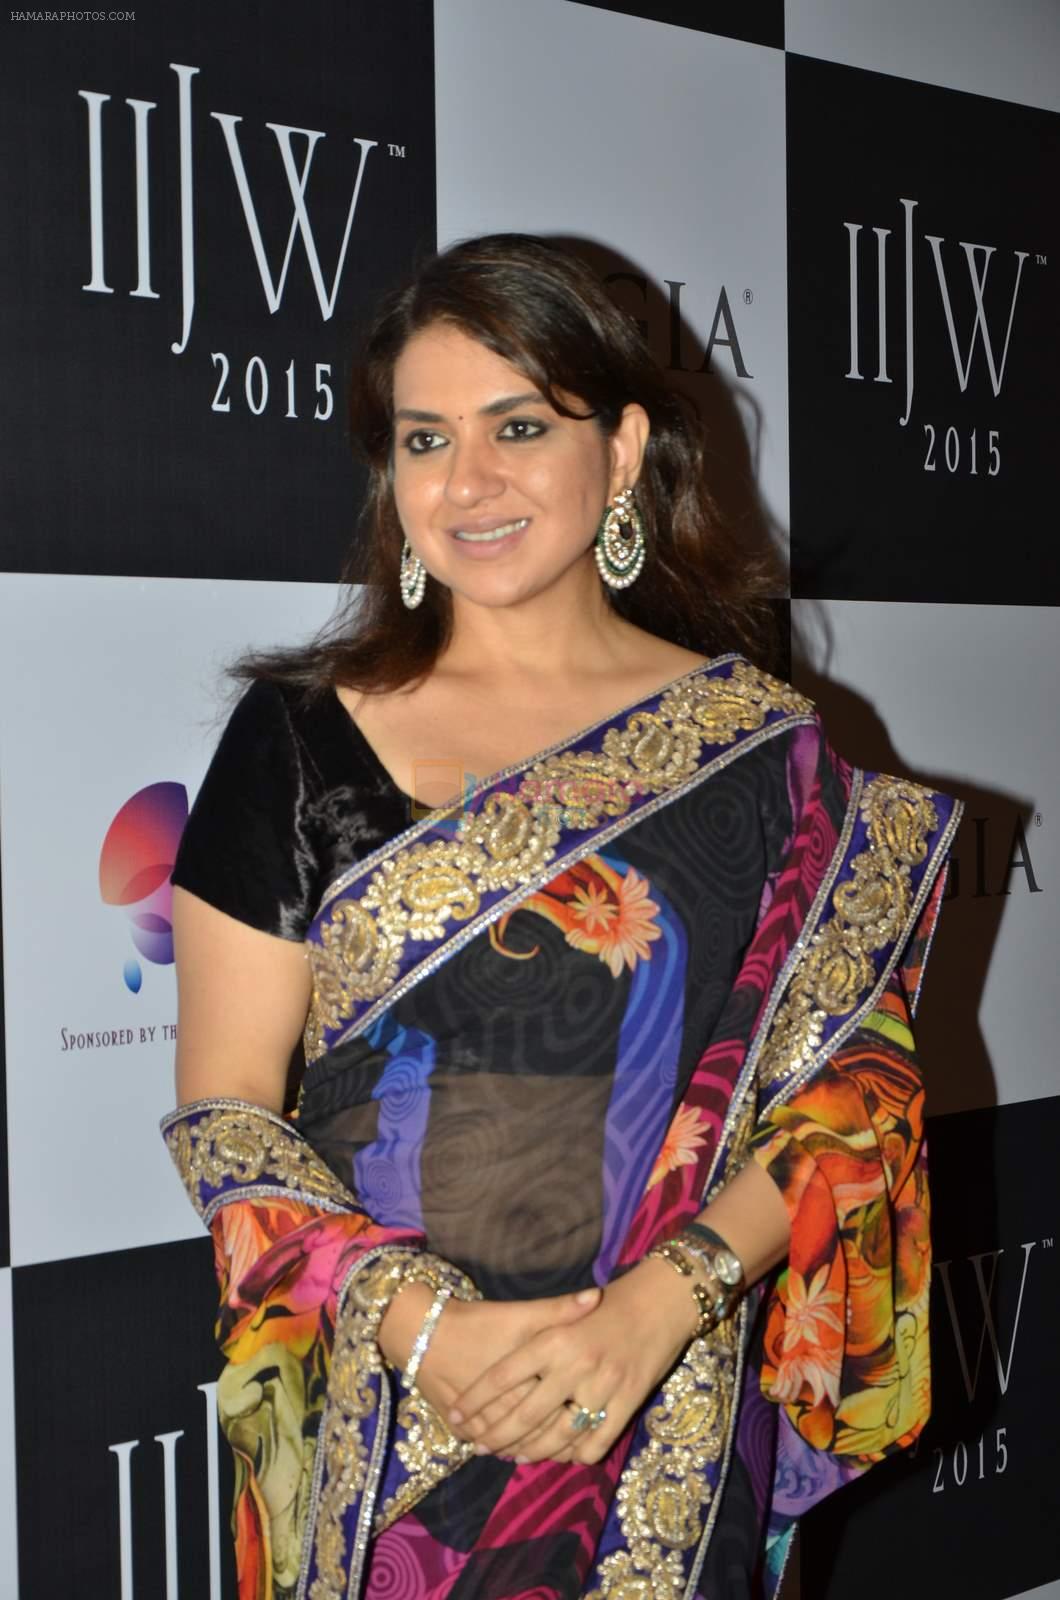 Shaina NC on Day 1 at IIJW 2015 on 3rd Aug 2015